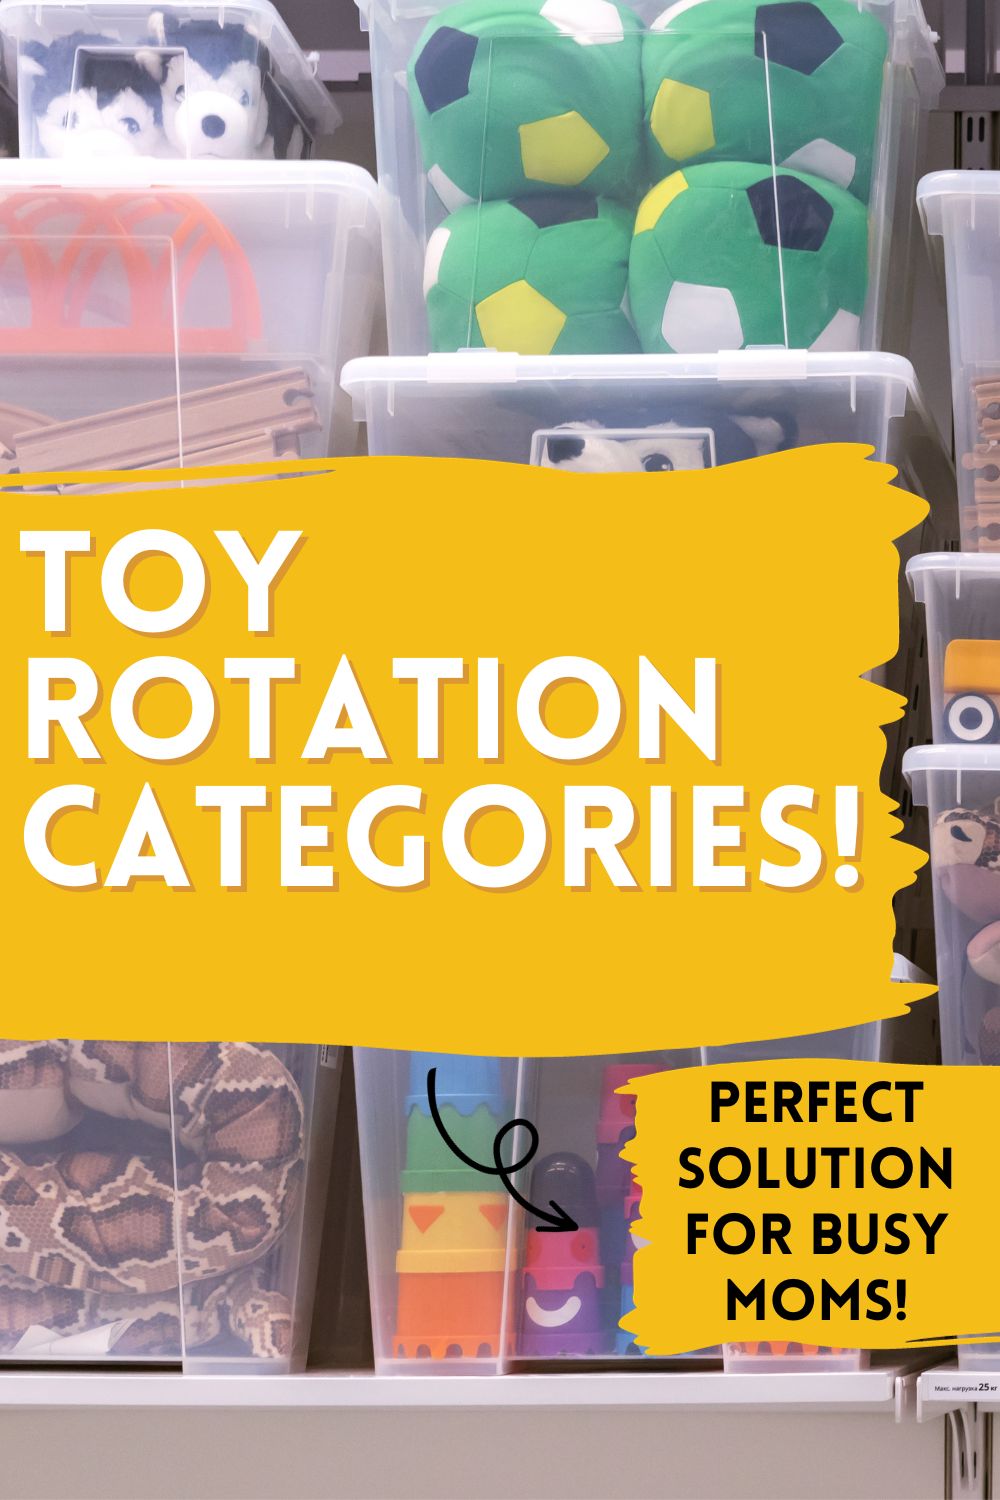 toys in bins for toy rotation. Text overlay reads "toy rotation categories. Perfect solution for busy moms"